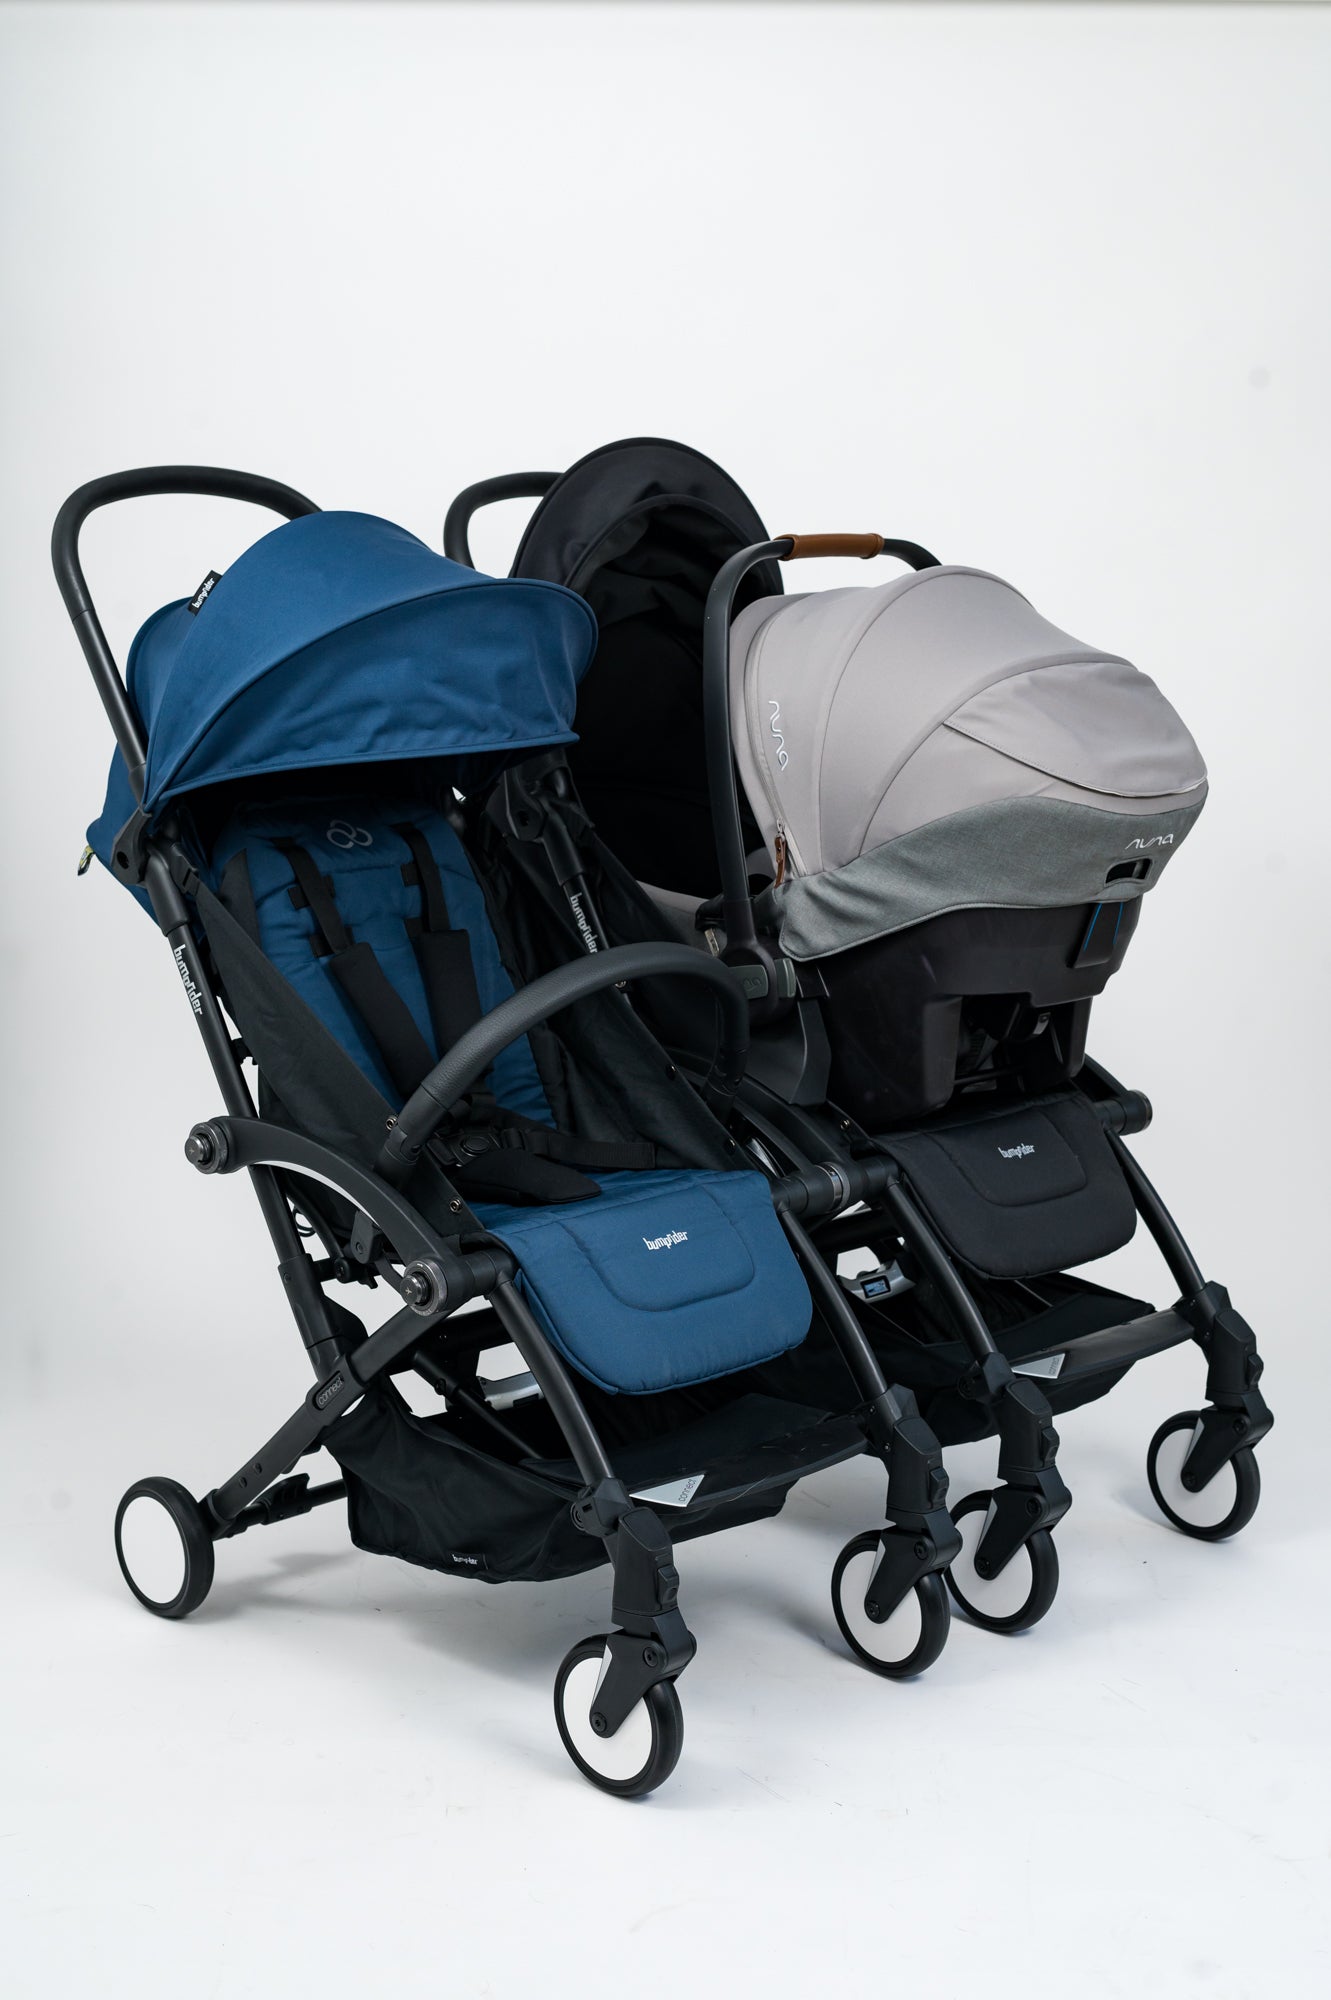 Bumprider Connect 3 in Navy and Black with Car seat